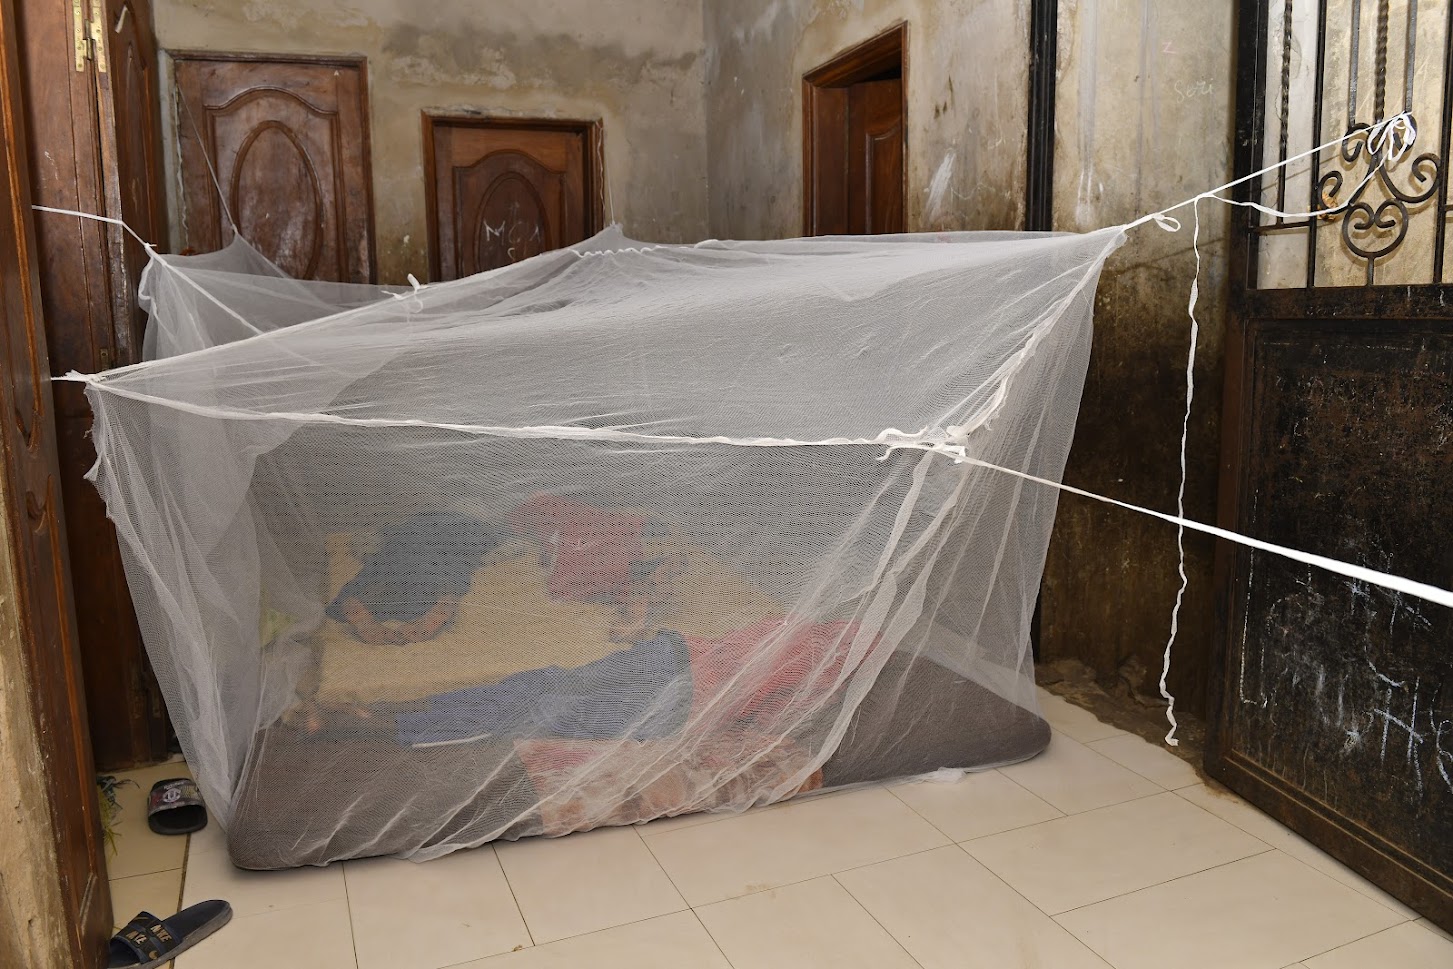 Reaching Talibé Children with Mosquito Nets